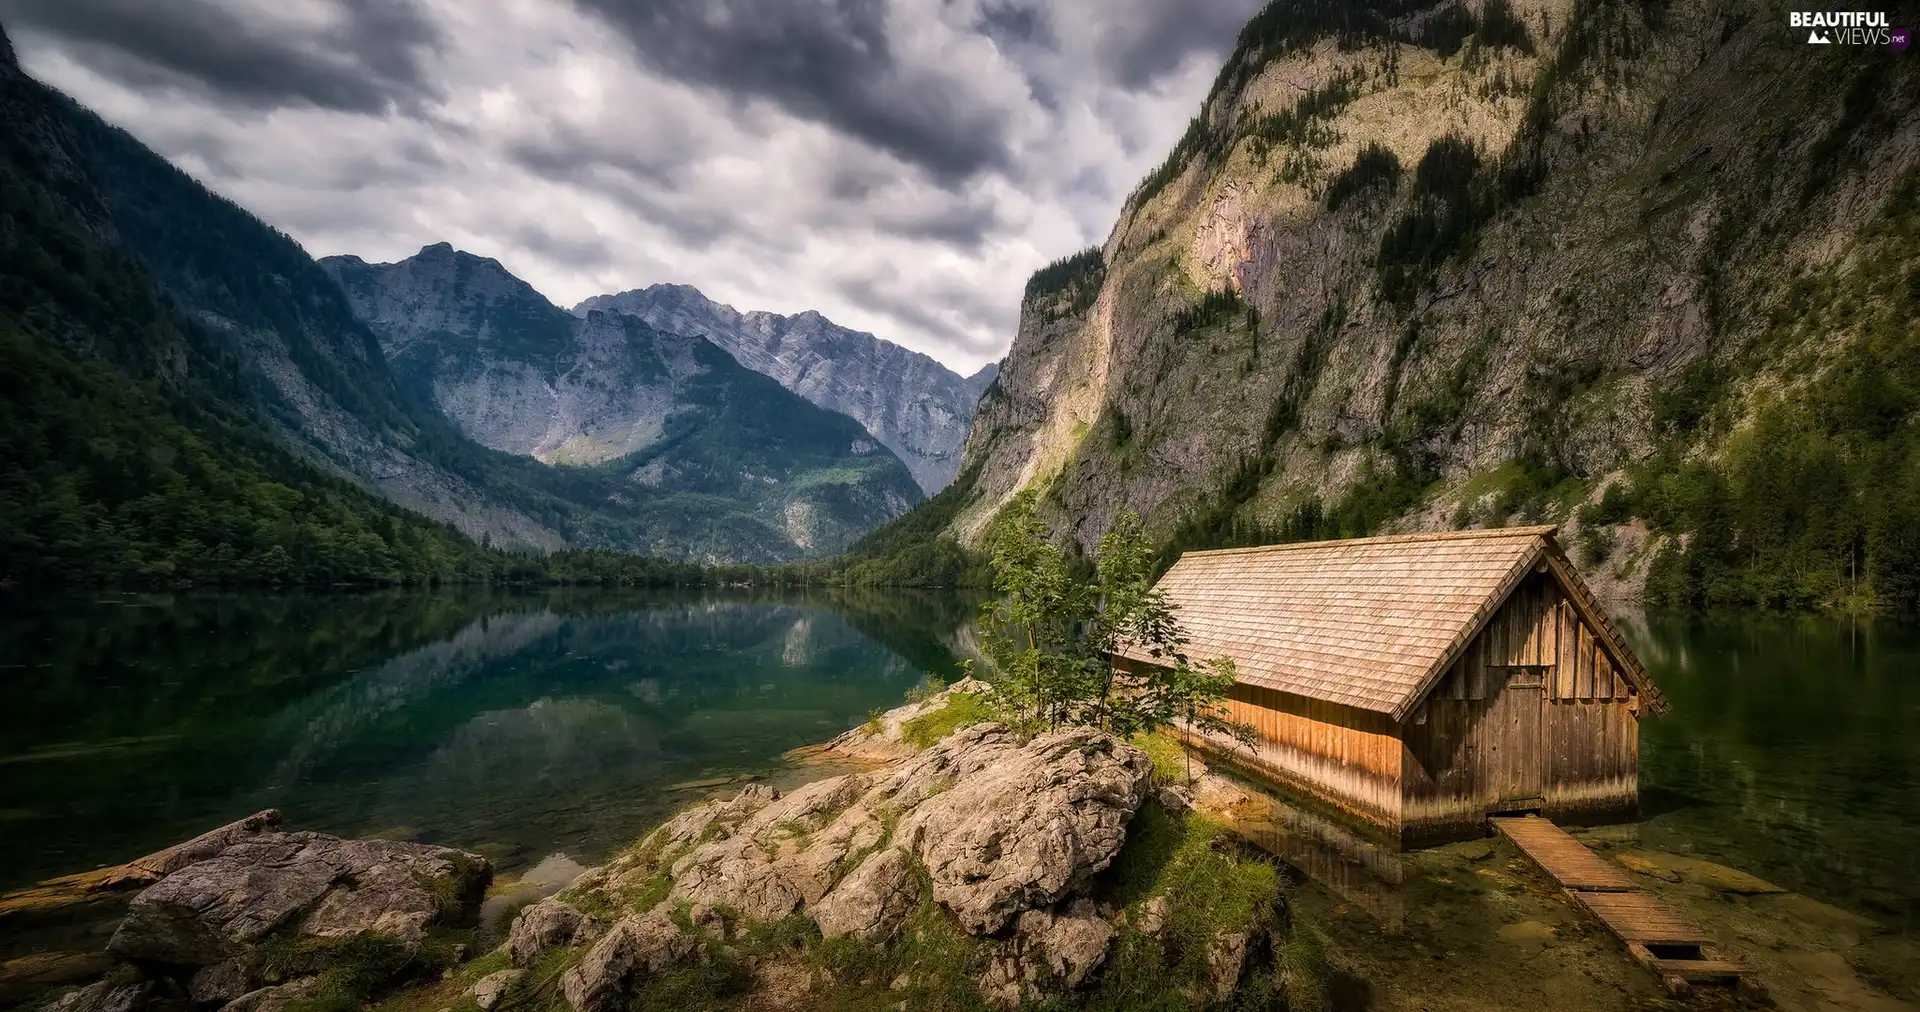 Stones, Obersee Lake, Alps Mountains, wooden, Bavaria, Germany, cote, Berchtesgaden National Park, Home